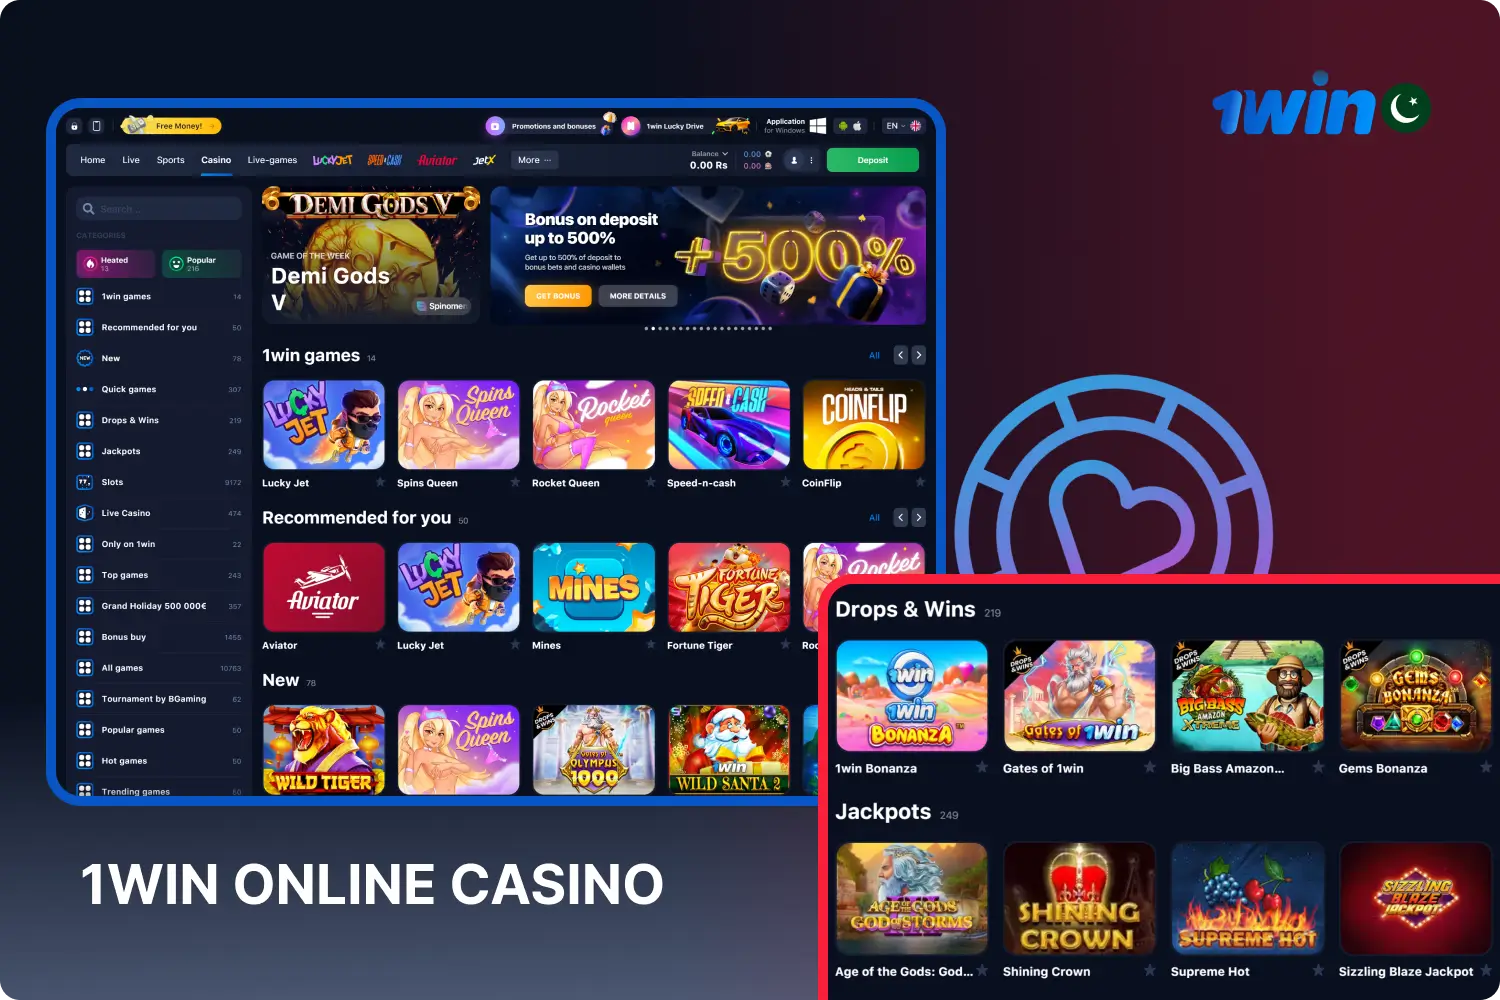 More than 11 thousand different games for real money await gamblers from Pakistan at the 1win online casino